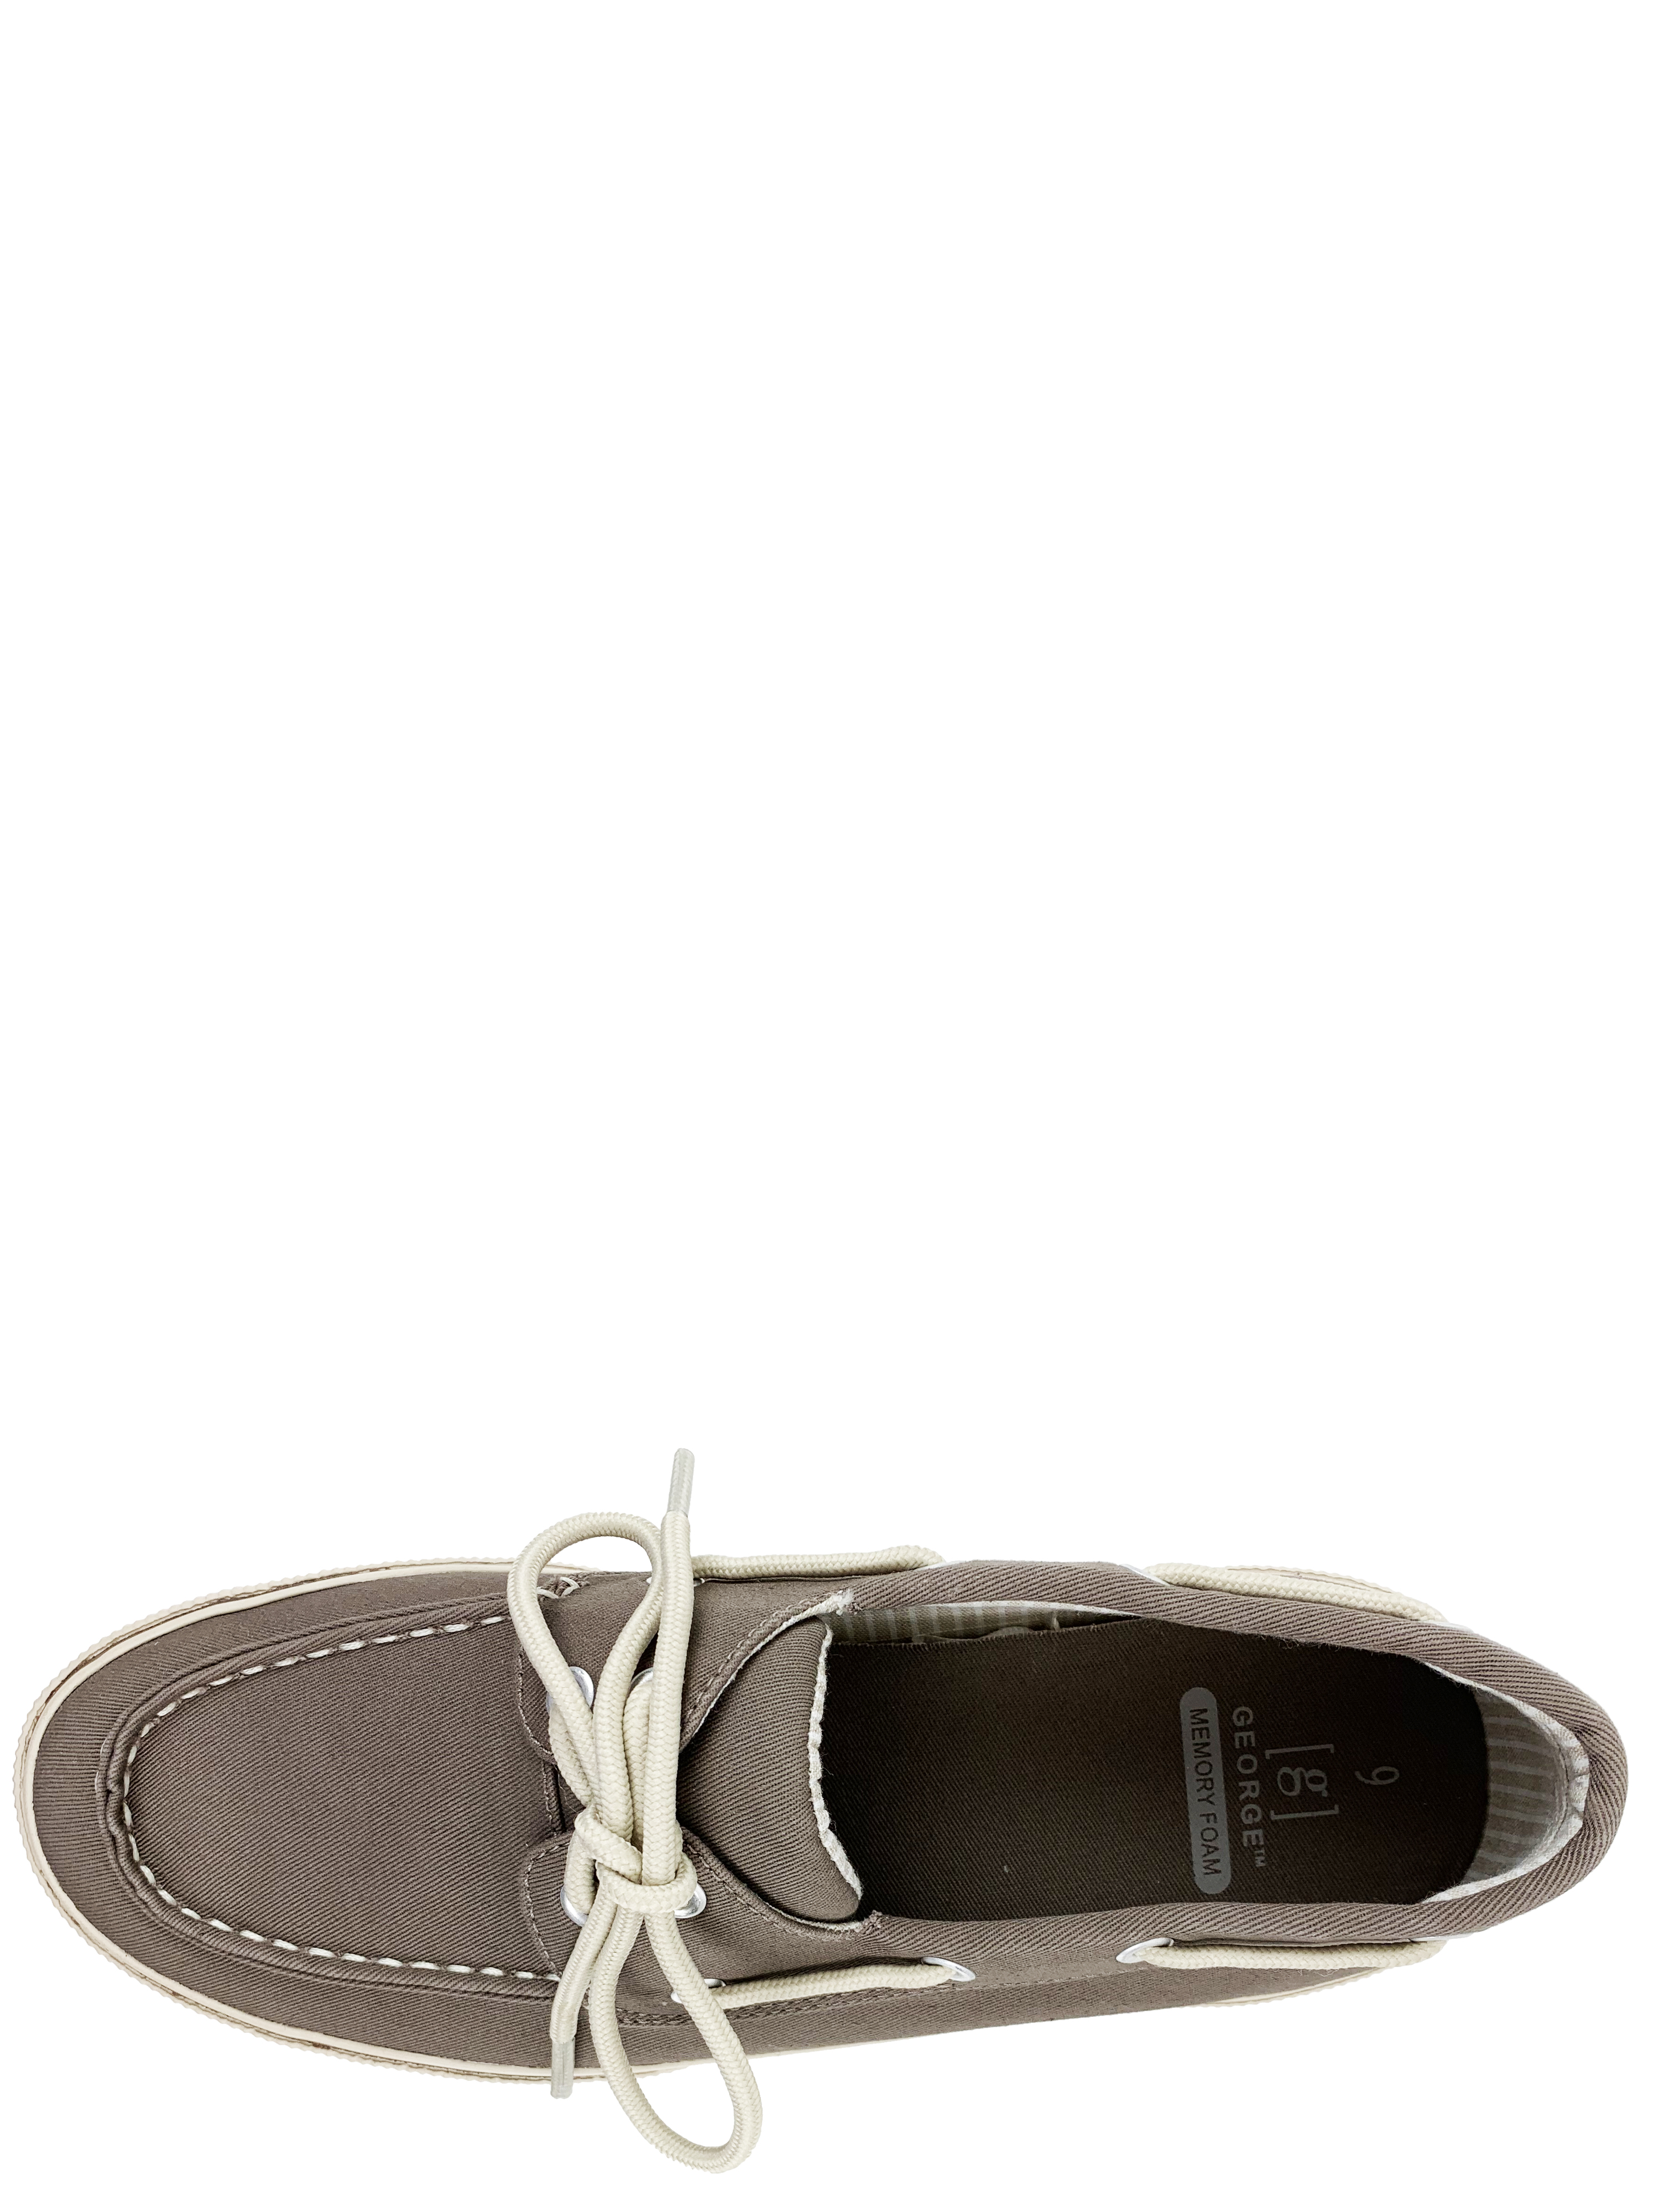 George Men's Classic Canvas Boat Shoe with Memory Foam - image 3 of 5